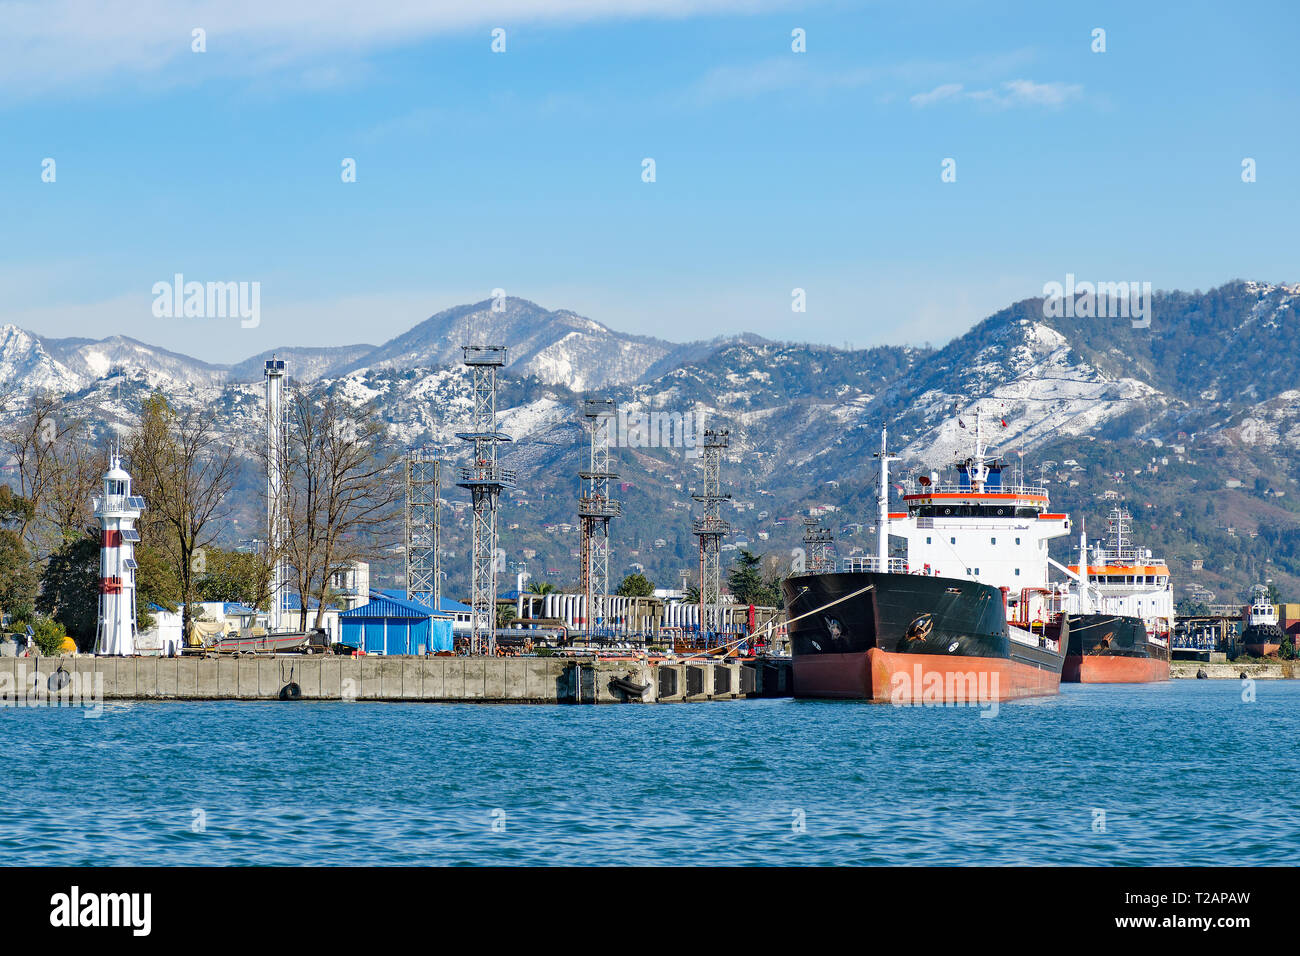 Port view - ships in the harbor, a lighthouse, snowy mountains in the background. Georgia, Batumi. Stock Photo